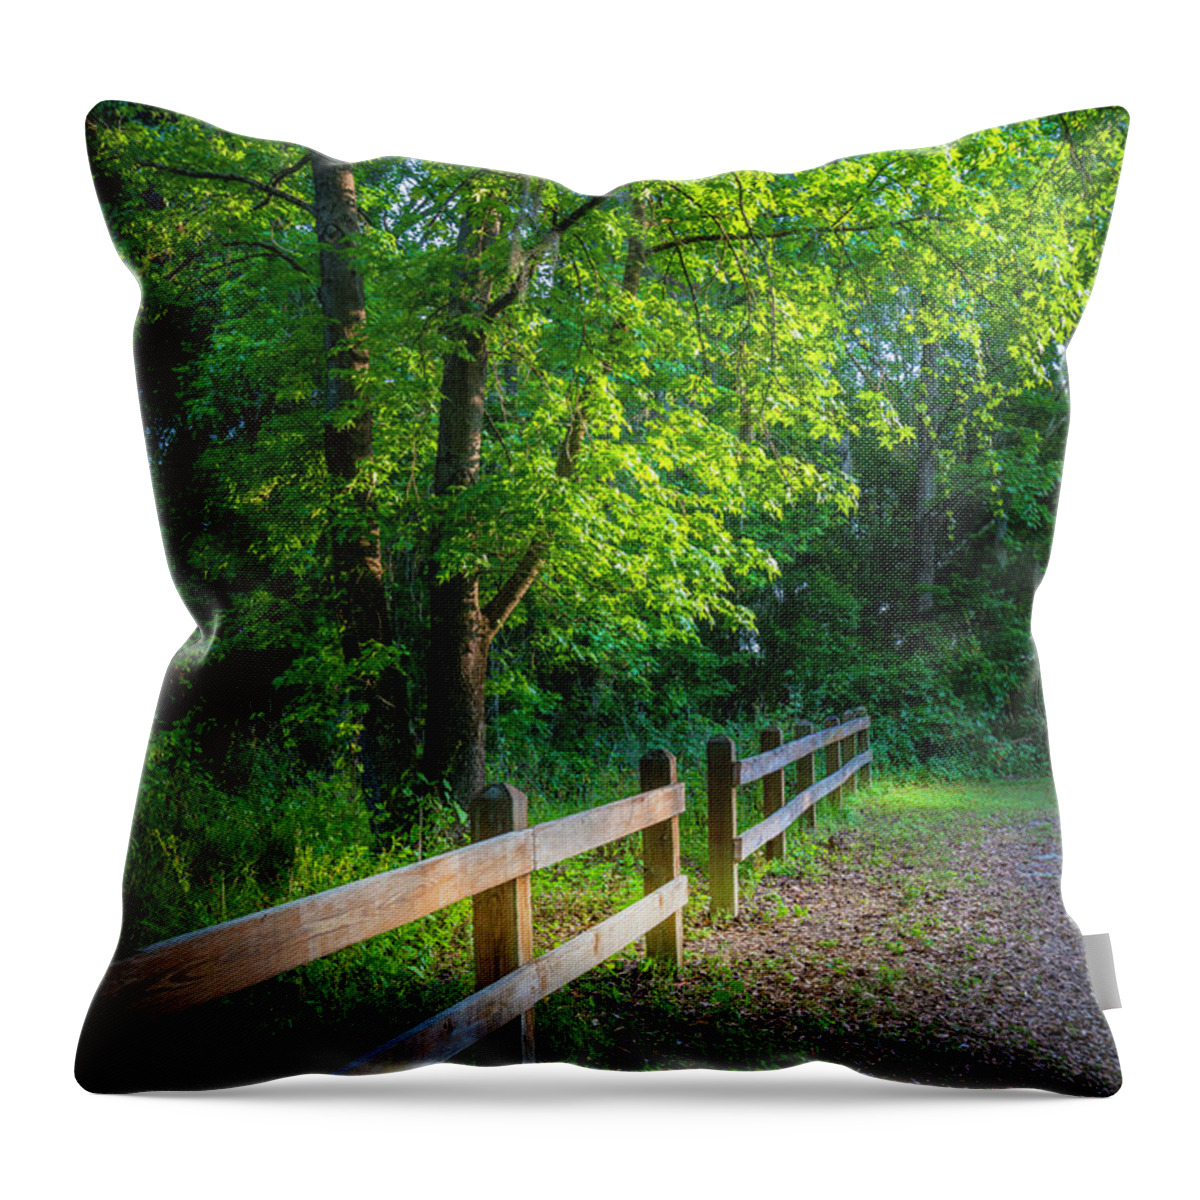 Edward Medard Park Throw Pillow featuring the photograph Spring Leaves by Marvin Spates